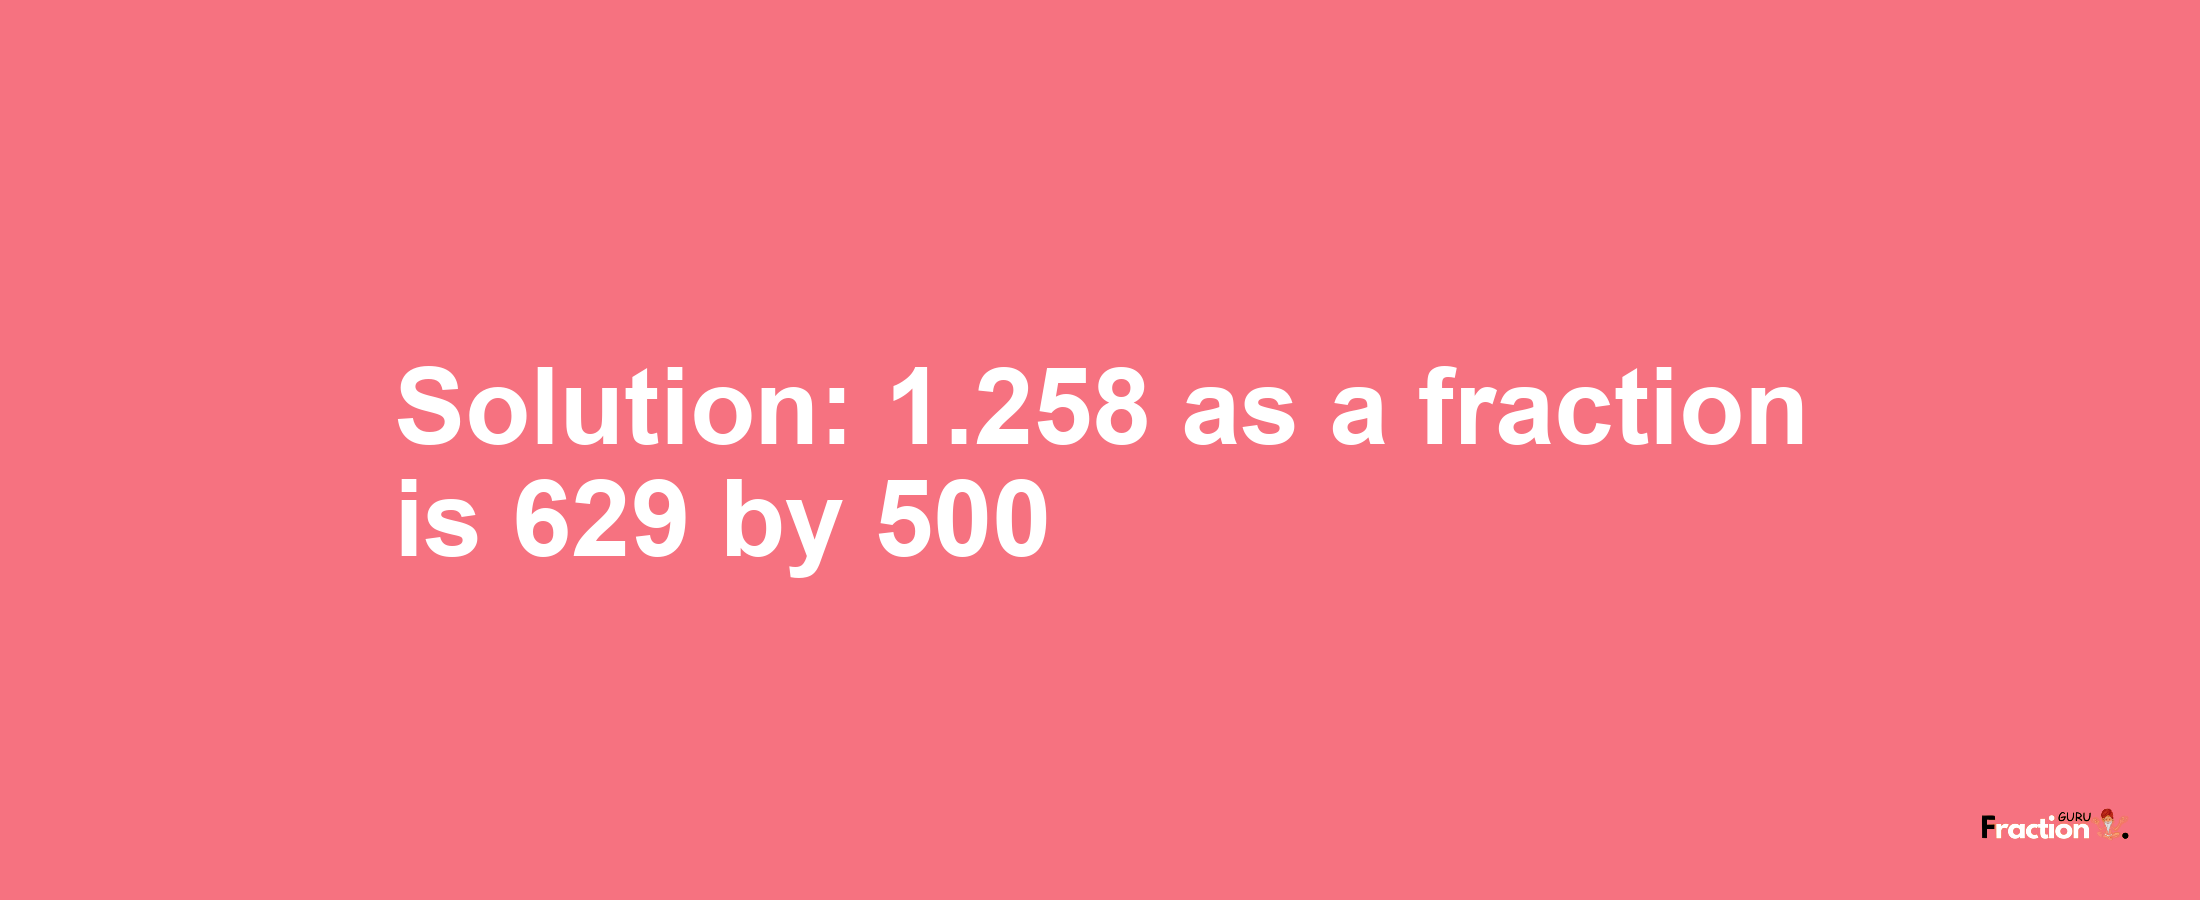 Solution:1.258 as a fraction is 629/500